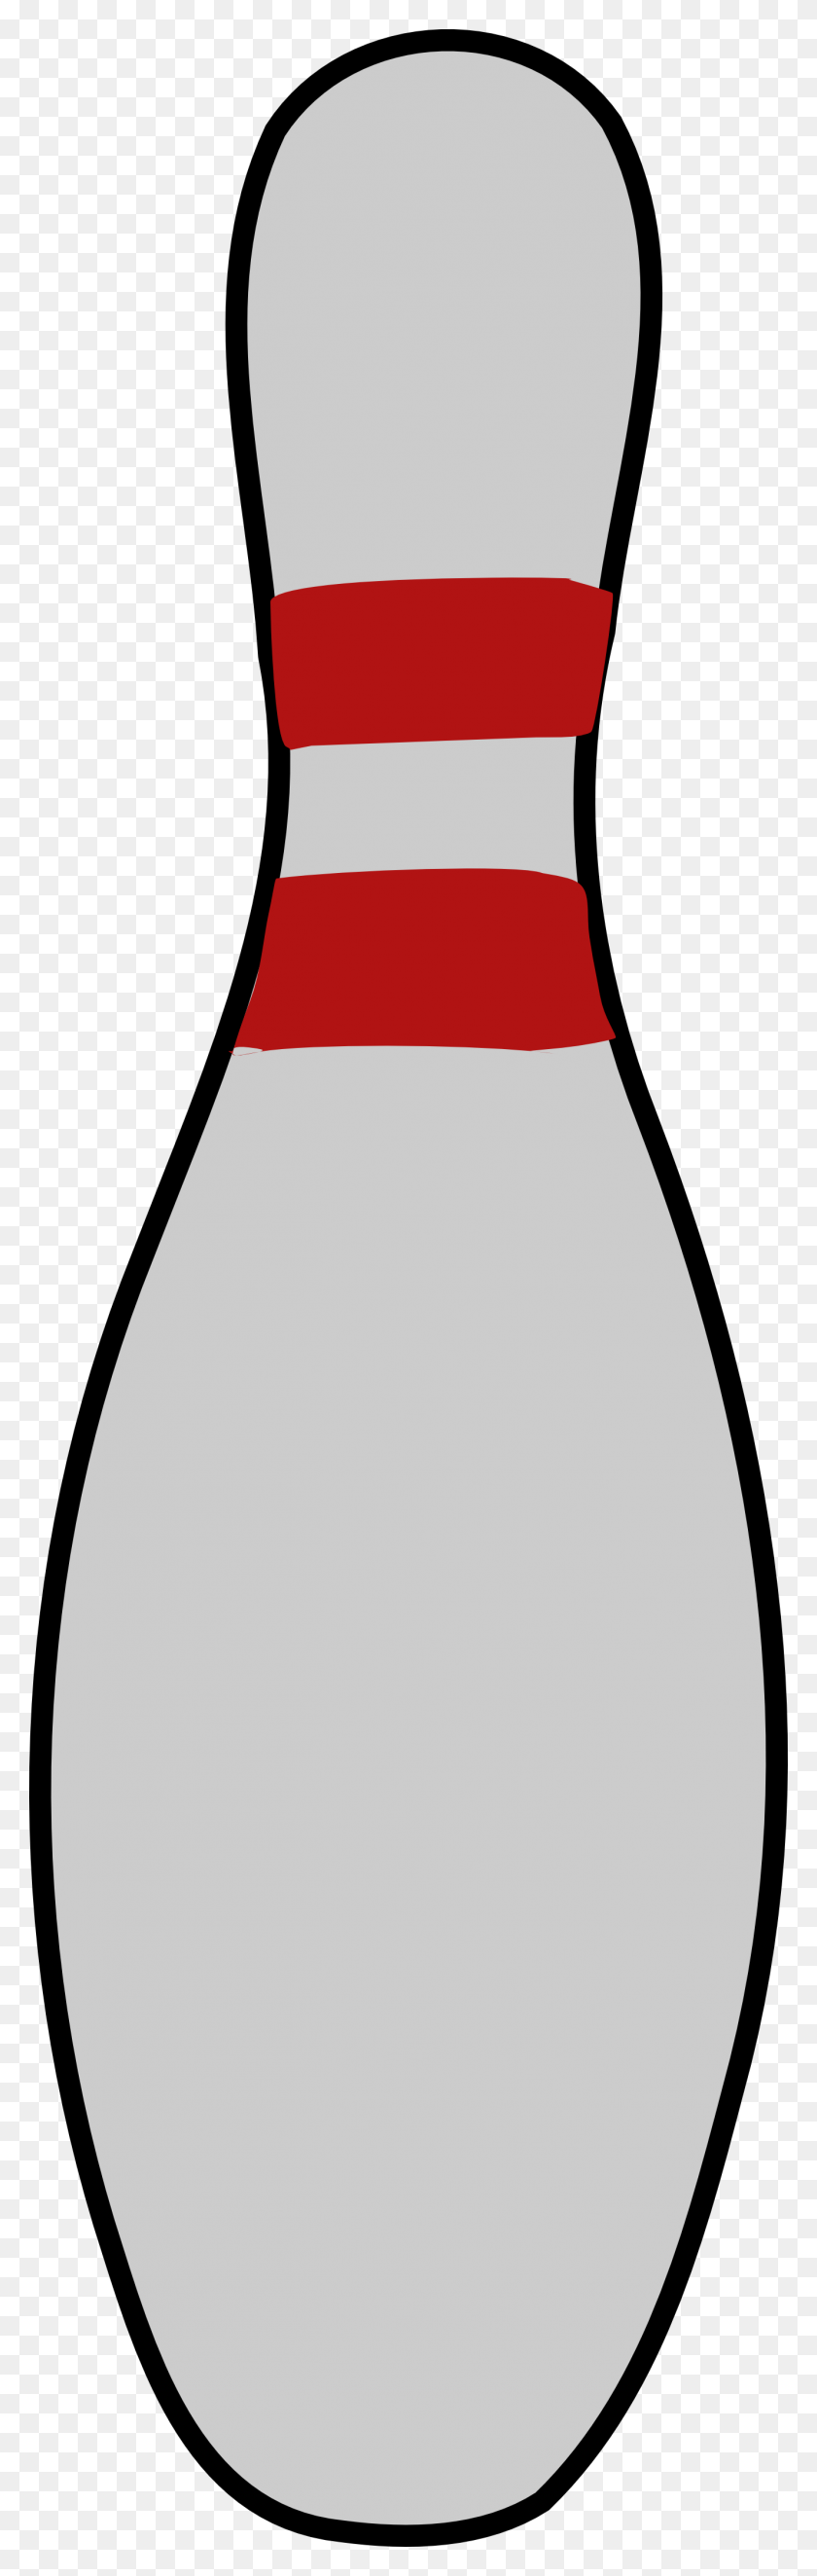 1331x4416 Bowling Pin Clipart - Letter C Clipart Black And White